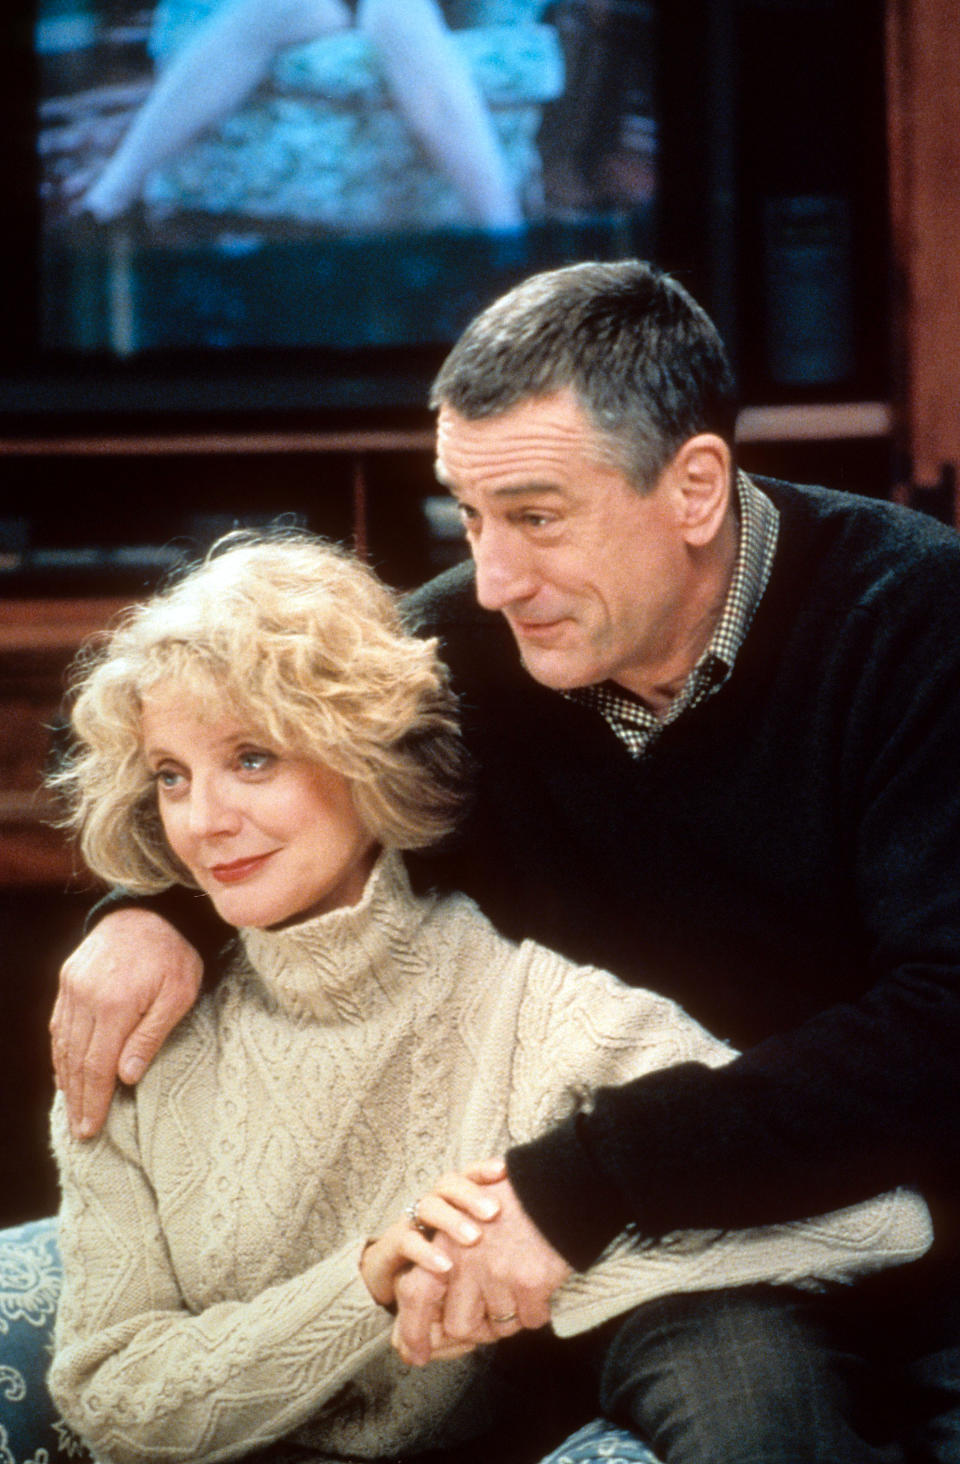 Blythe Danner sitting with Robert De Niro in a scene from the film 'Meet The Parents', 2000. (Photo by Universal/Getty Images)